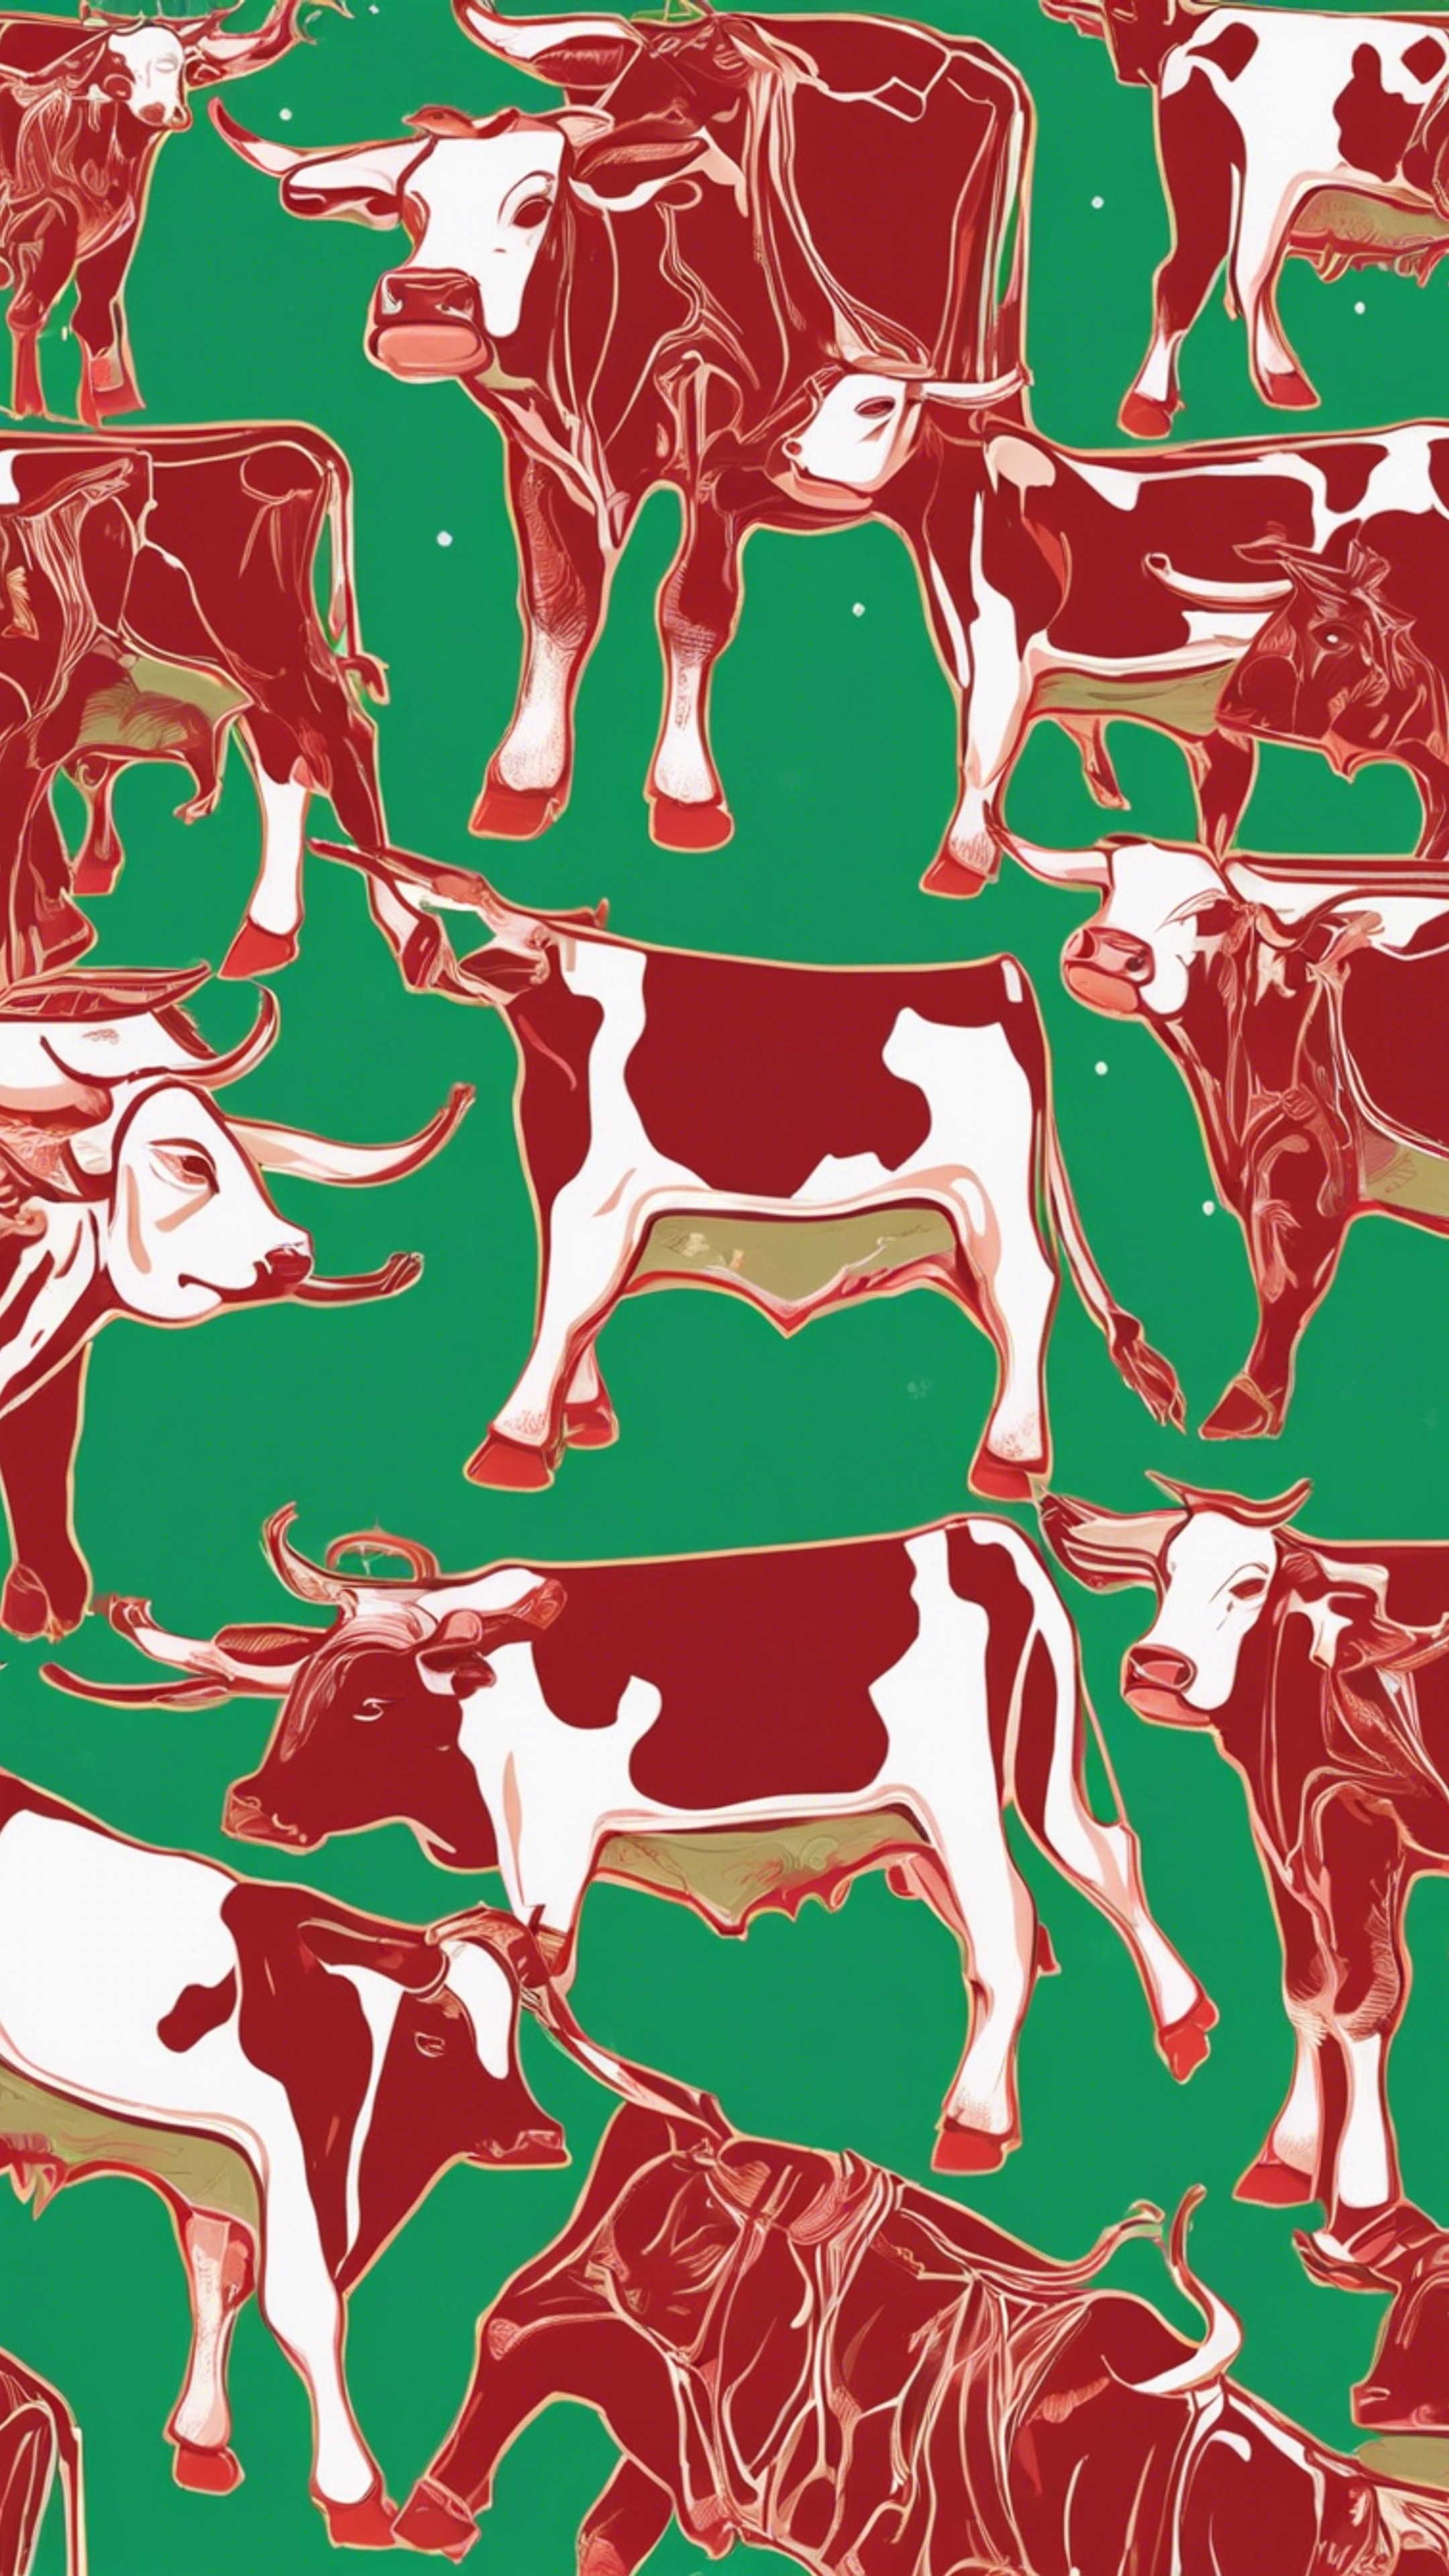 An abstract art featuring earthy green and vibrant red cow patterns. Papel de parede[bce8b500f11040f088c2]